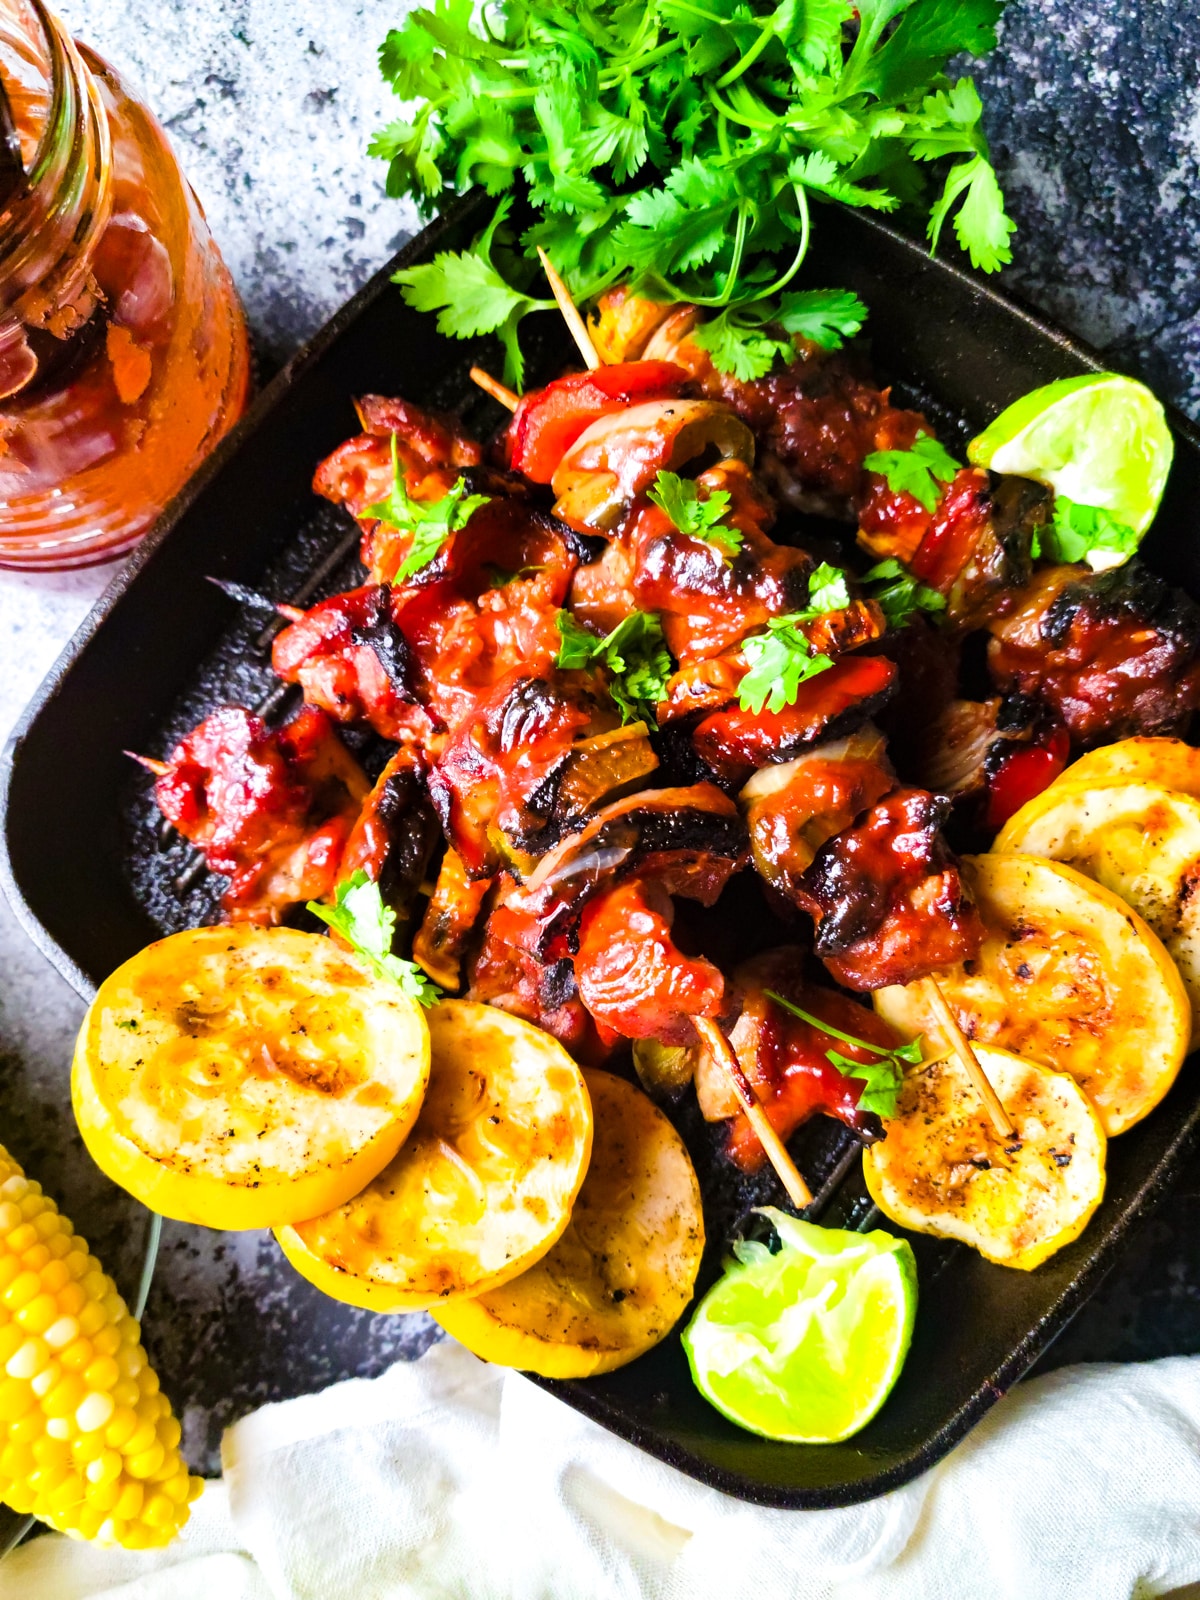 Brochetas de Pollo (Chicken Kabobs) cooked in a cast iron grilled skillet with slices of yellow squash on skillet, corn on the cobs on the side on a plate and a mason jar with guava barbecue sauce beside skillet.